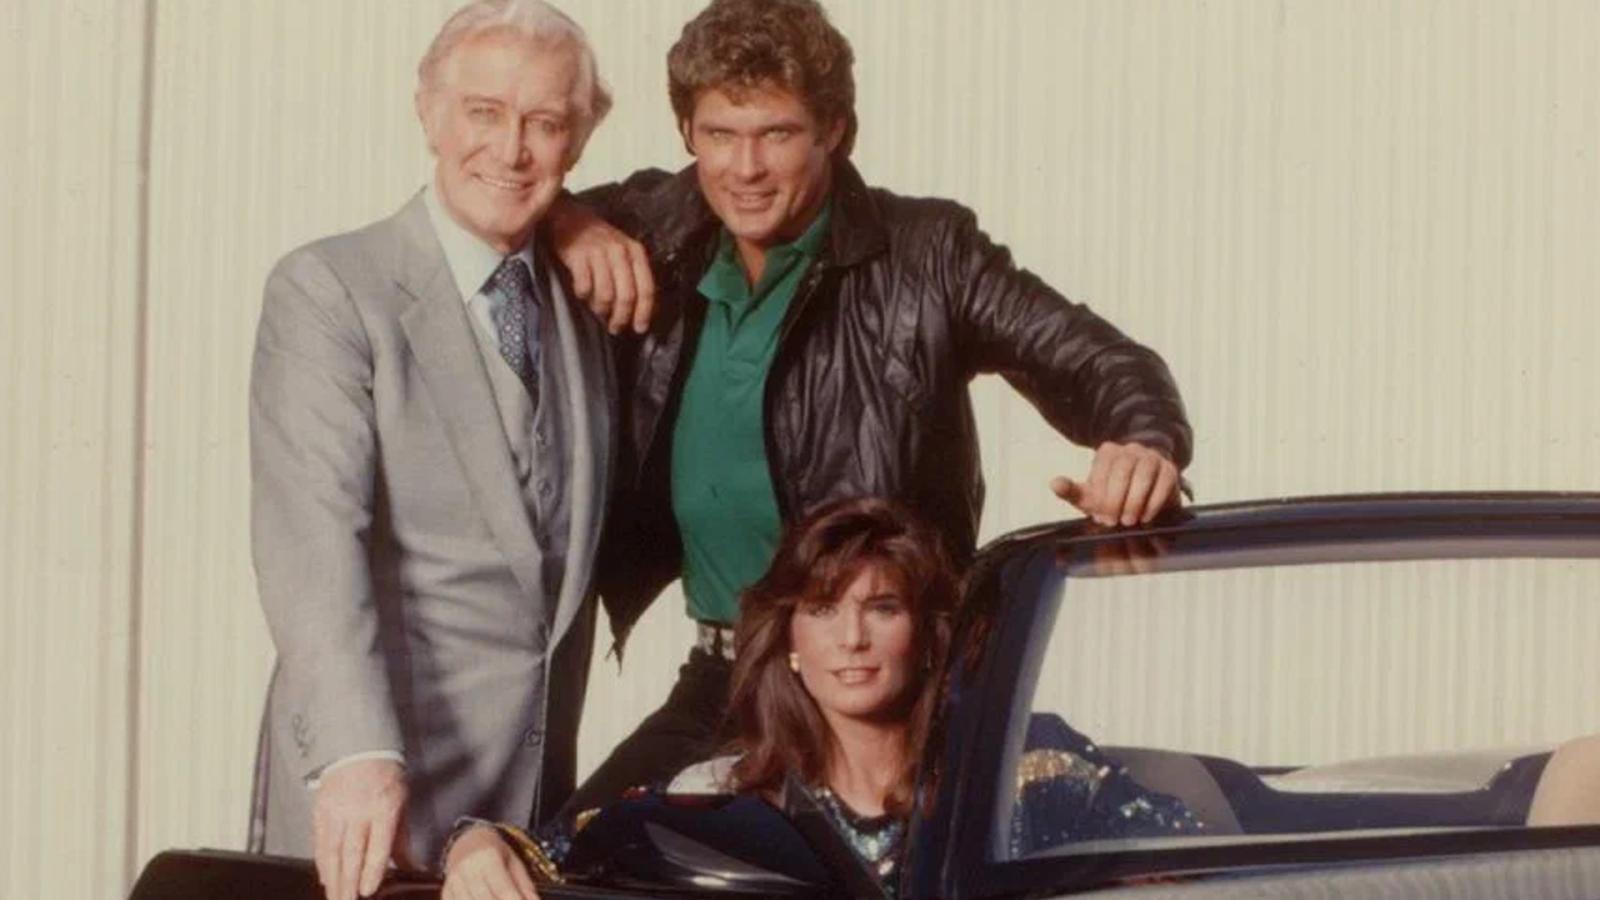 15 Vintage '80s Shows That Are More Binge-Worthy Than Today's Hits - image 5